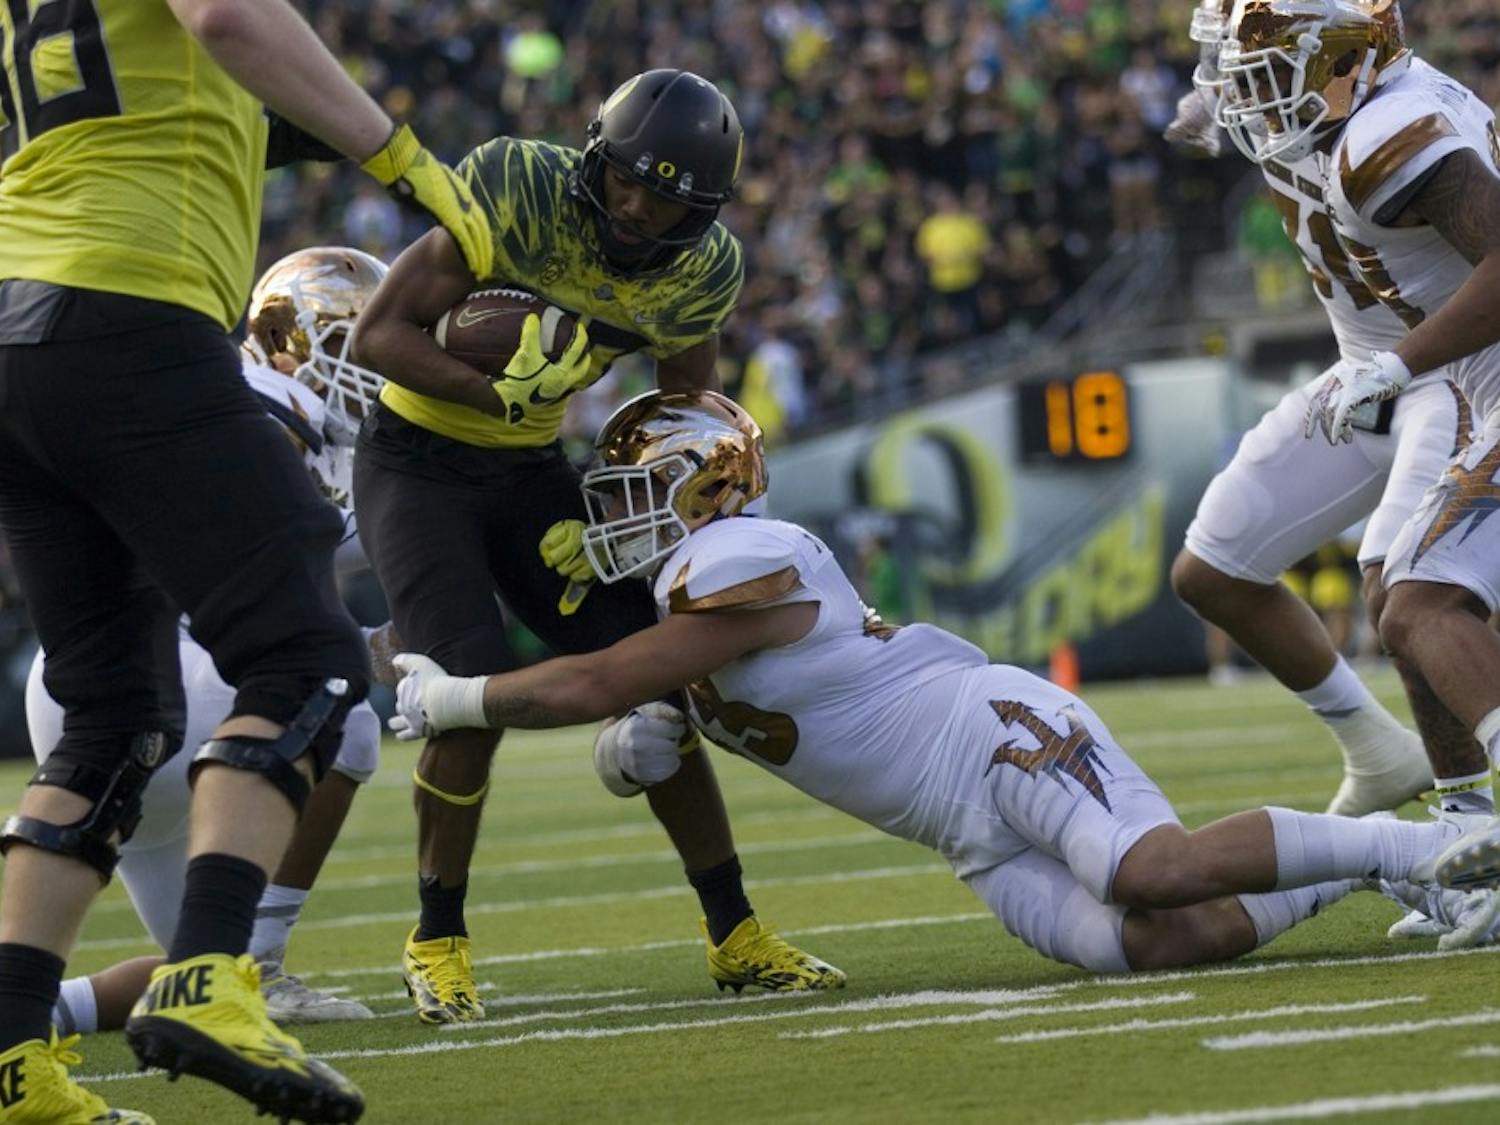 Photo Gallery: ASU football takes on Oregon in Pac-12 road game